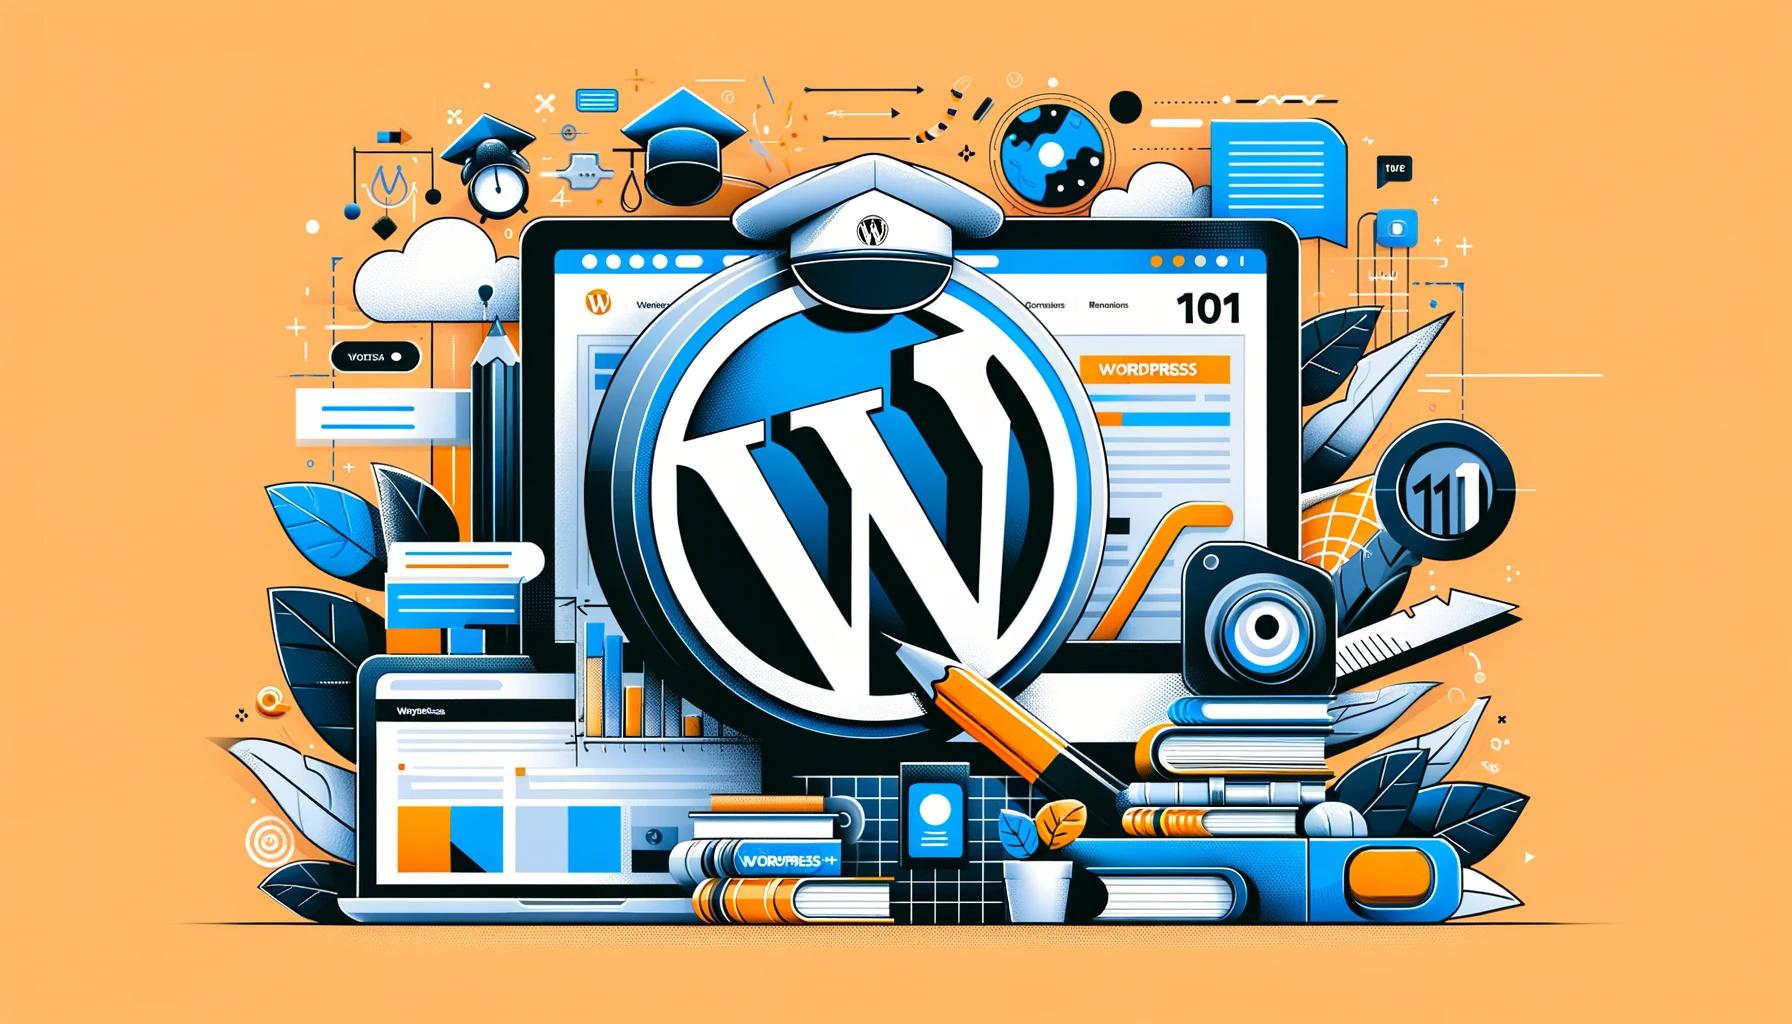 WordPress 101: The Ultimate Guide for Beginners